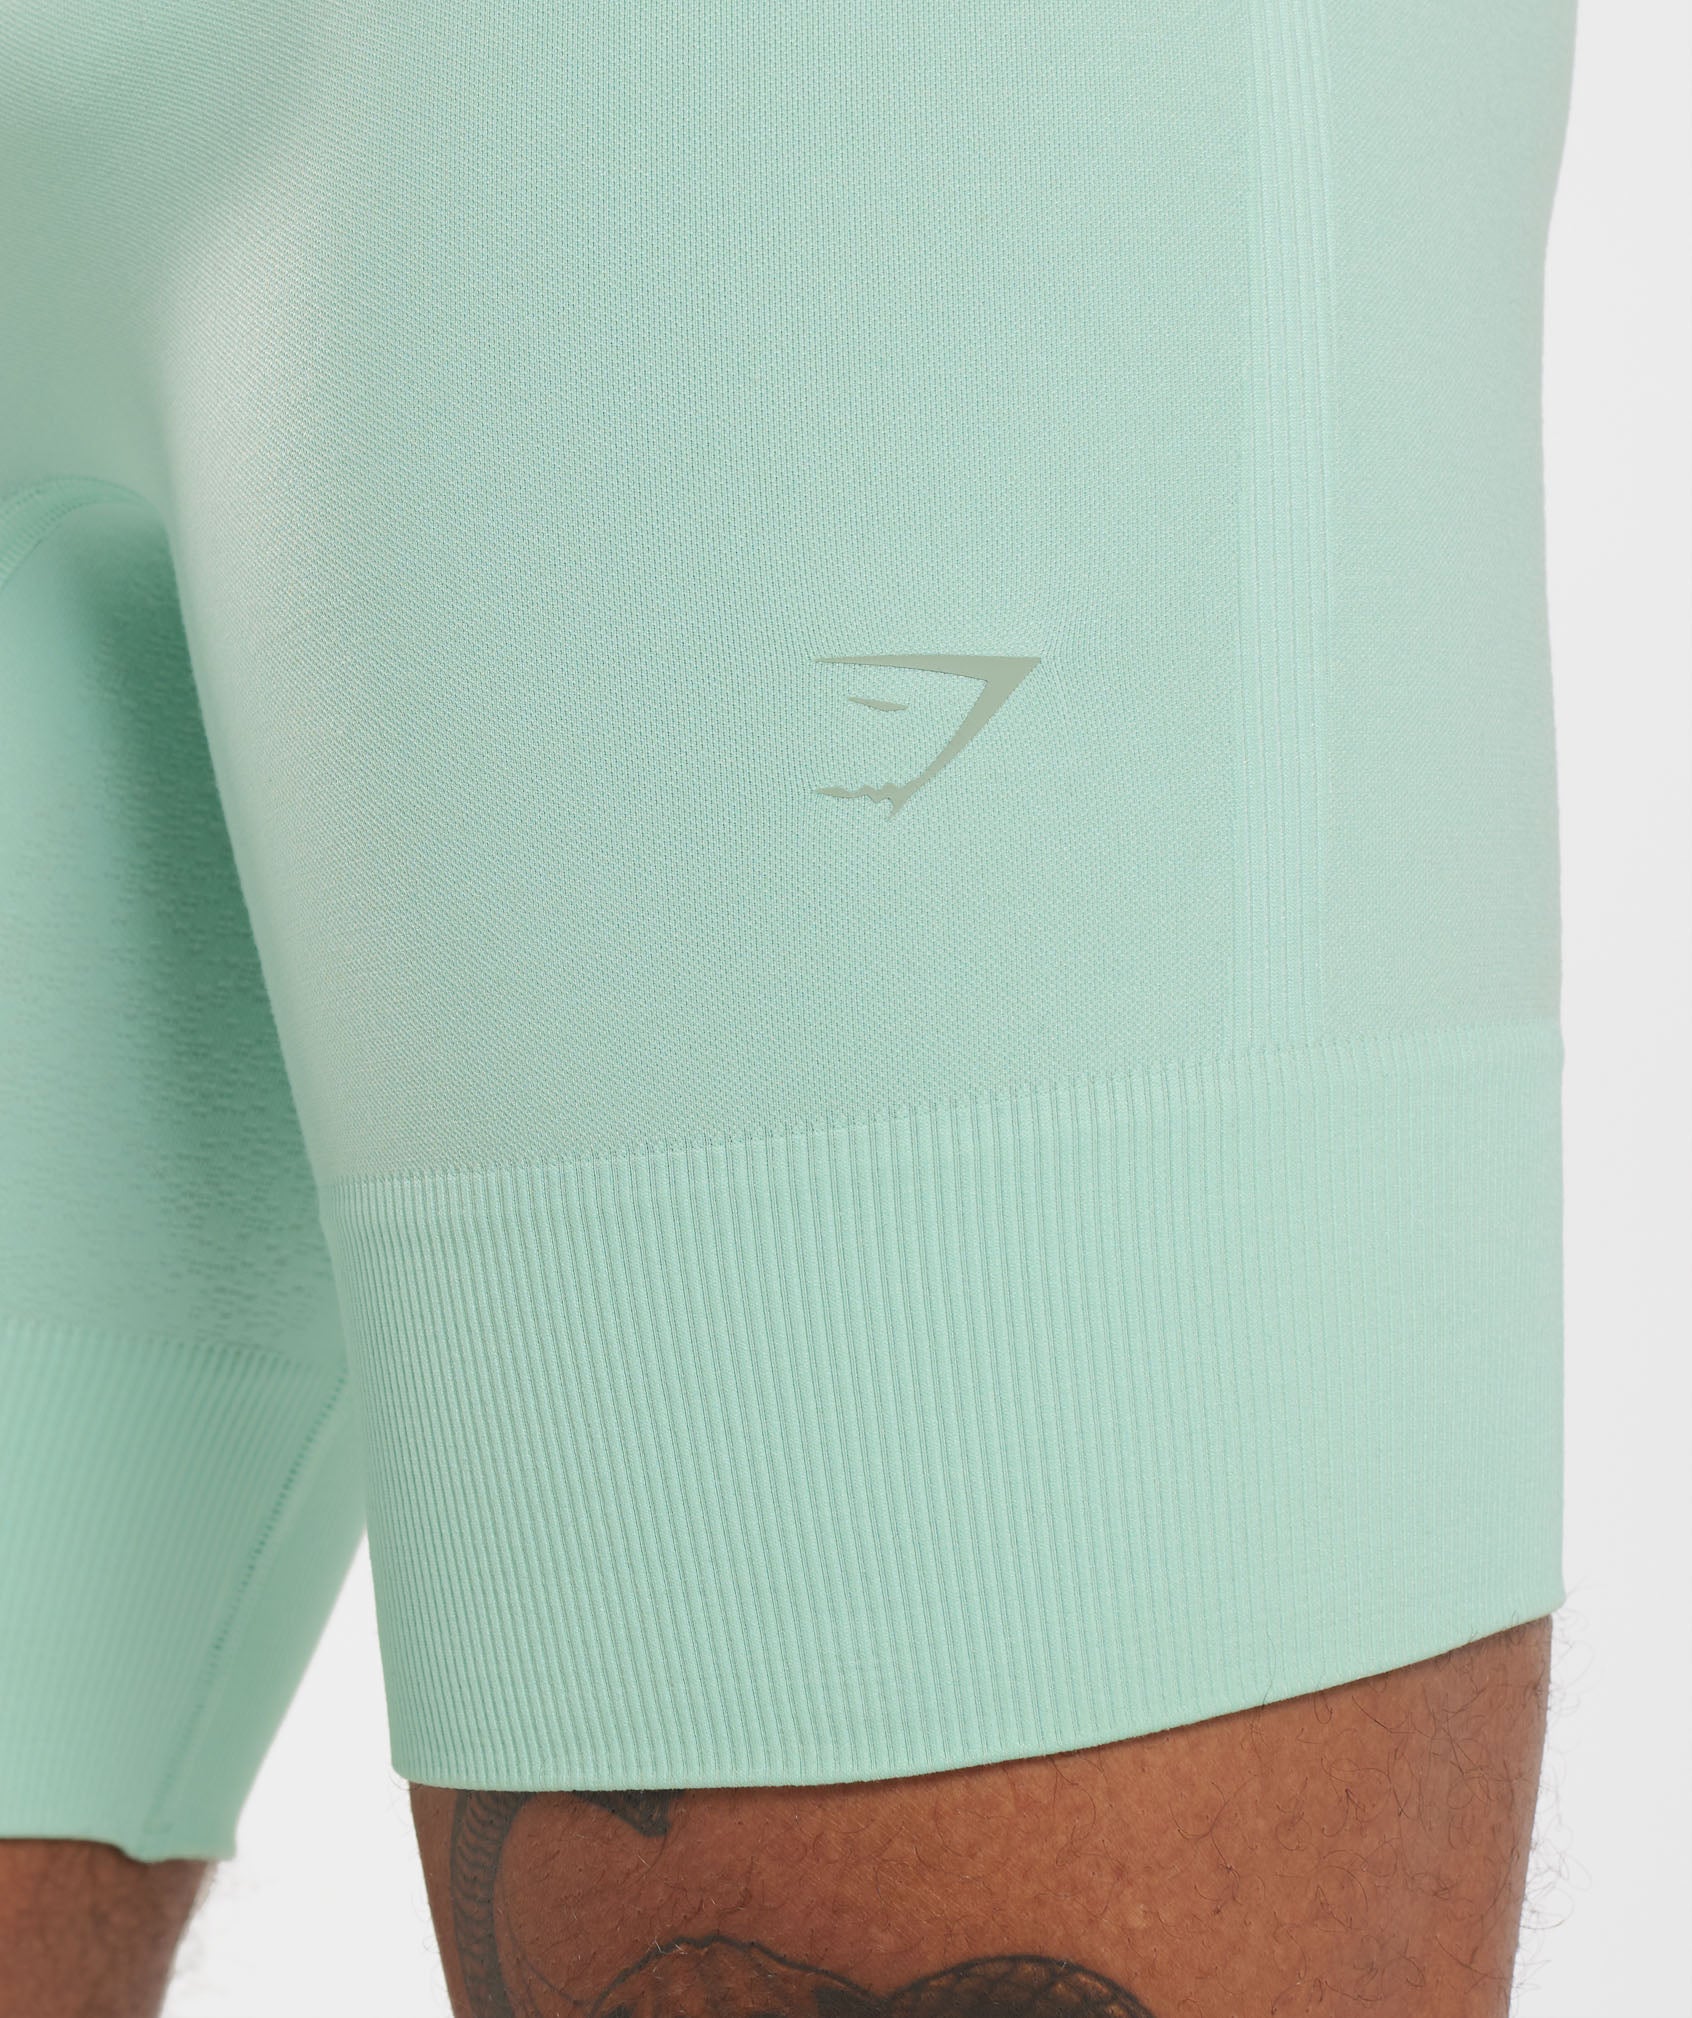 Running Seamless 7" Shorts in Pastel Green - view 6